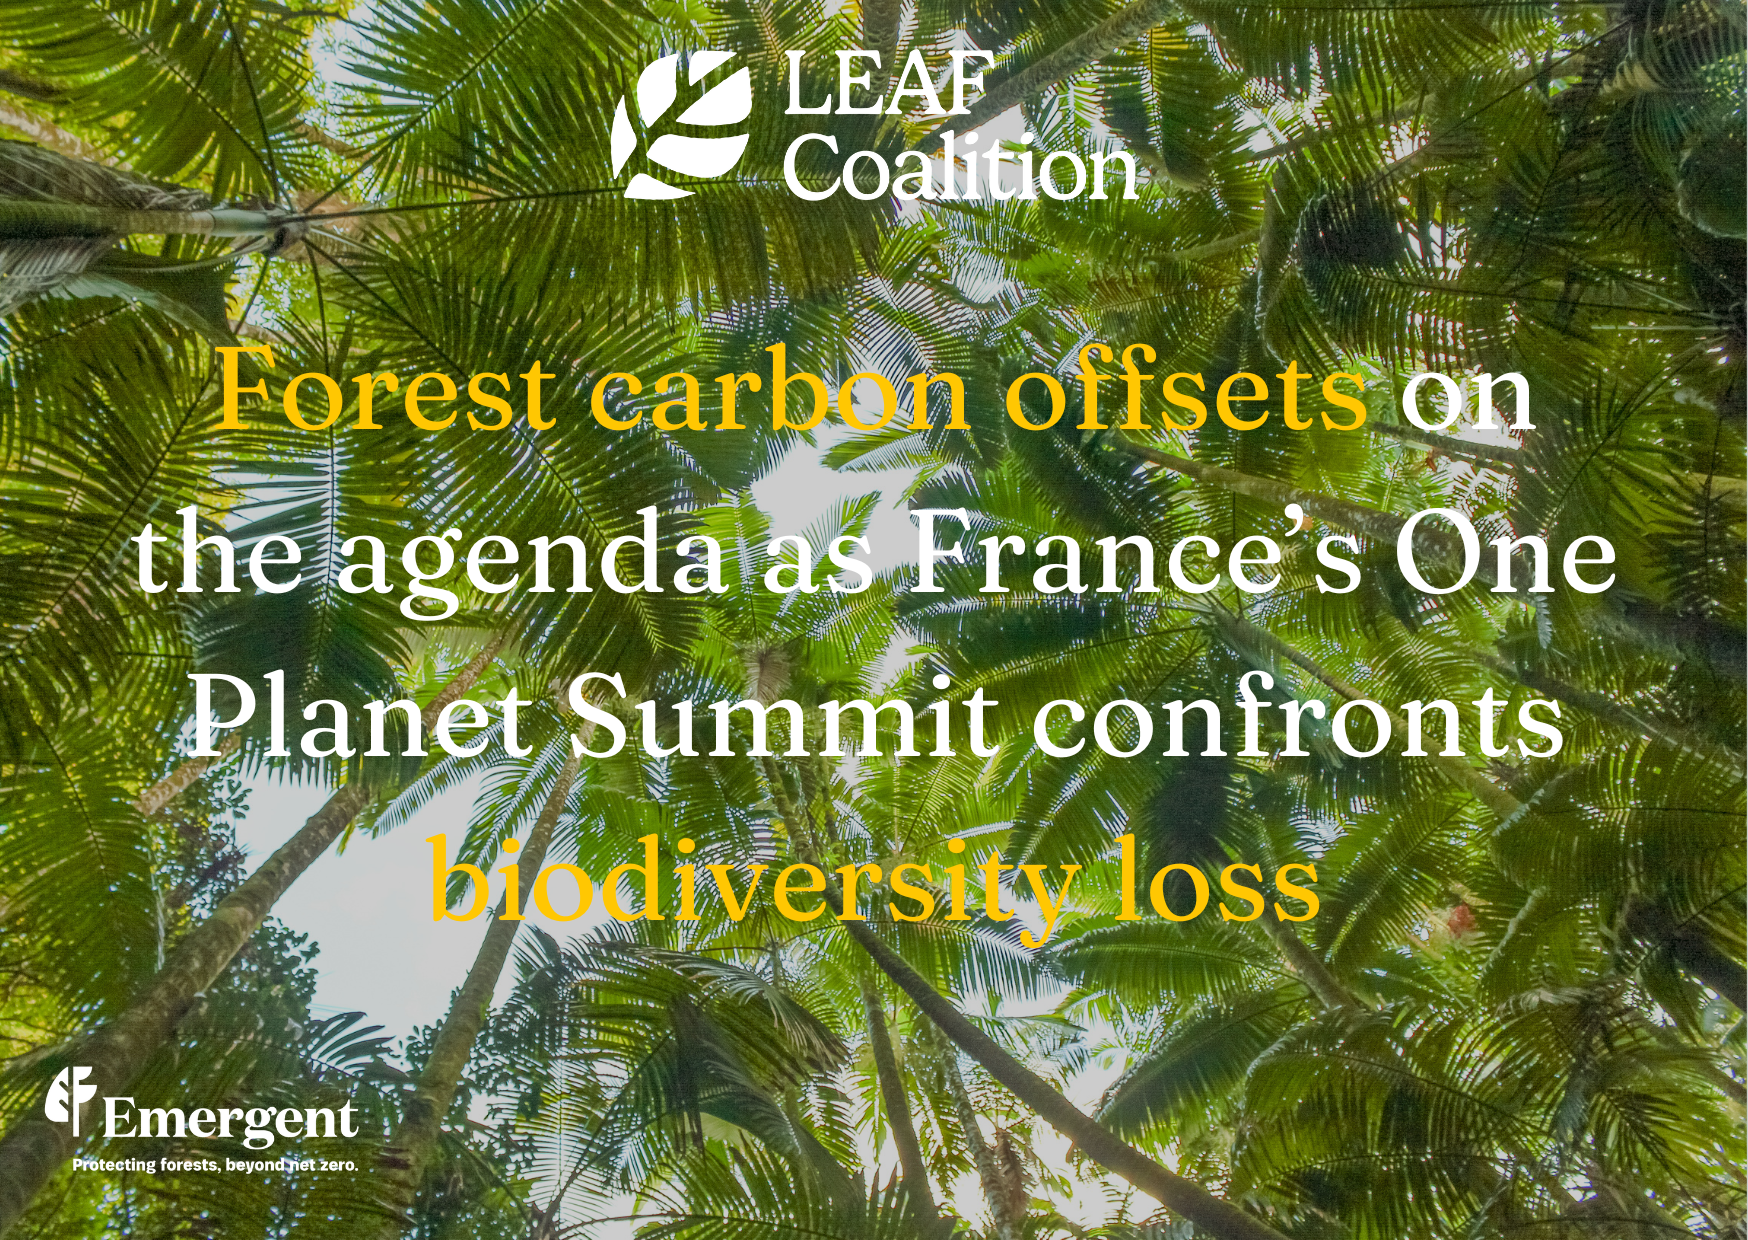 Forest carbon offsets on the agenda as France’s One Planet Summit confronts biodiversity loss